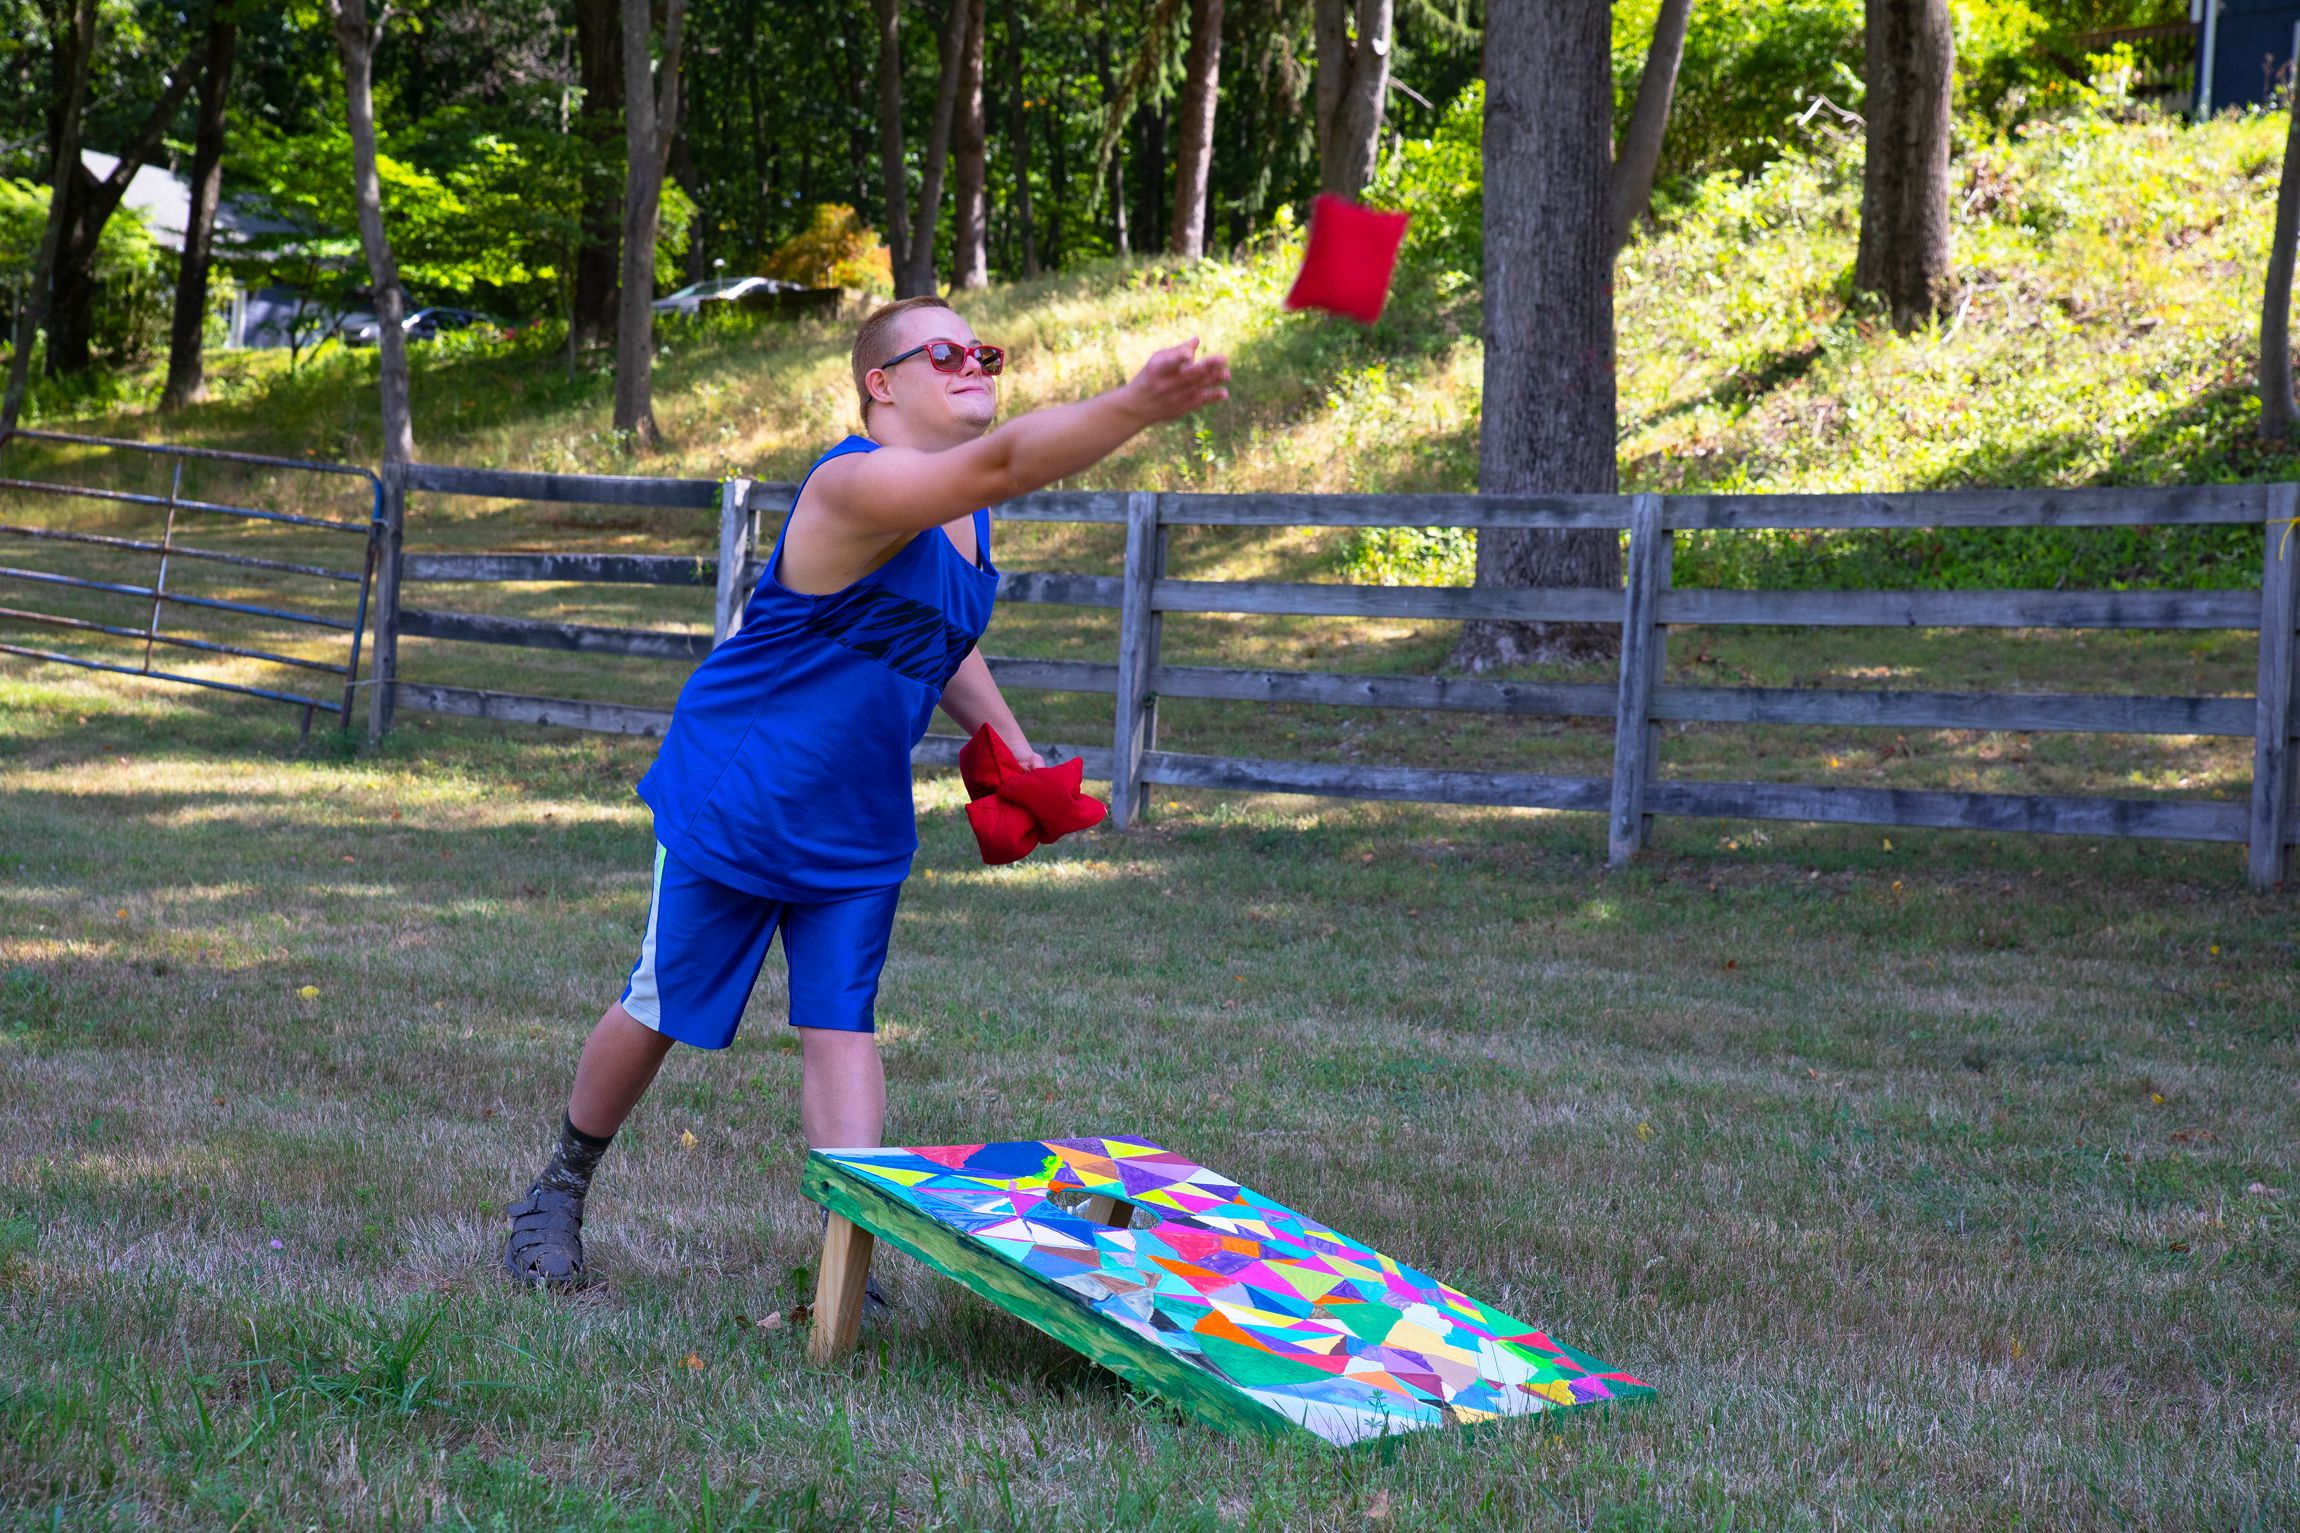 This young man tosses bean bags during outdoor activity time on the farm.